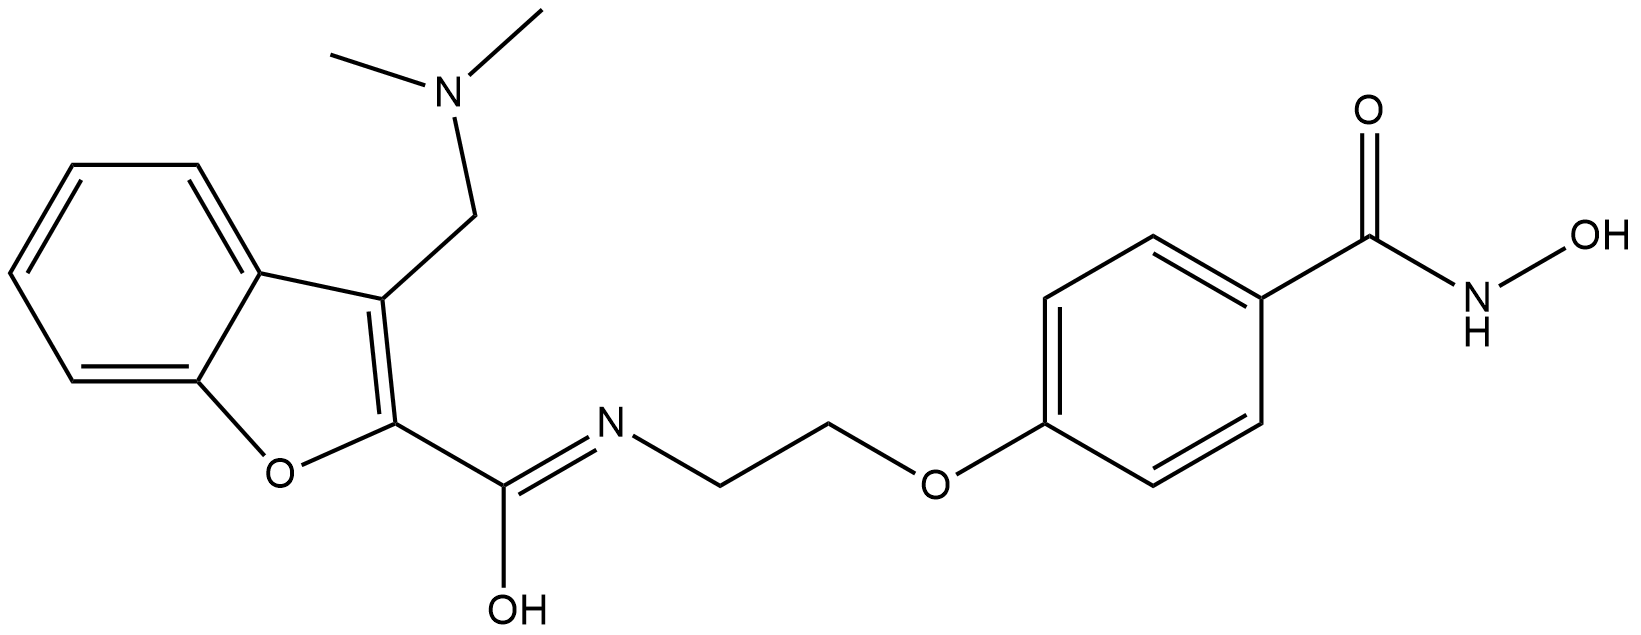 PCI-24781 (CRA-024781)  Chemical Structure